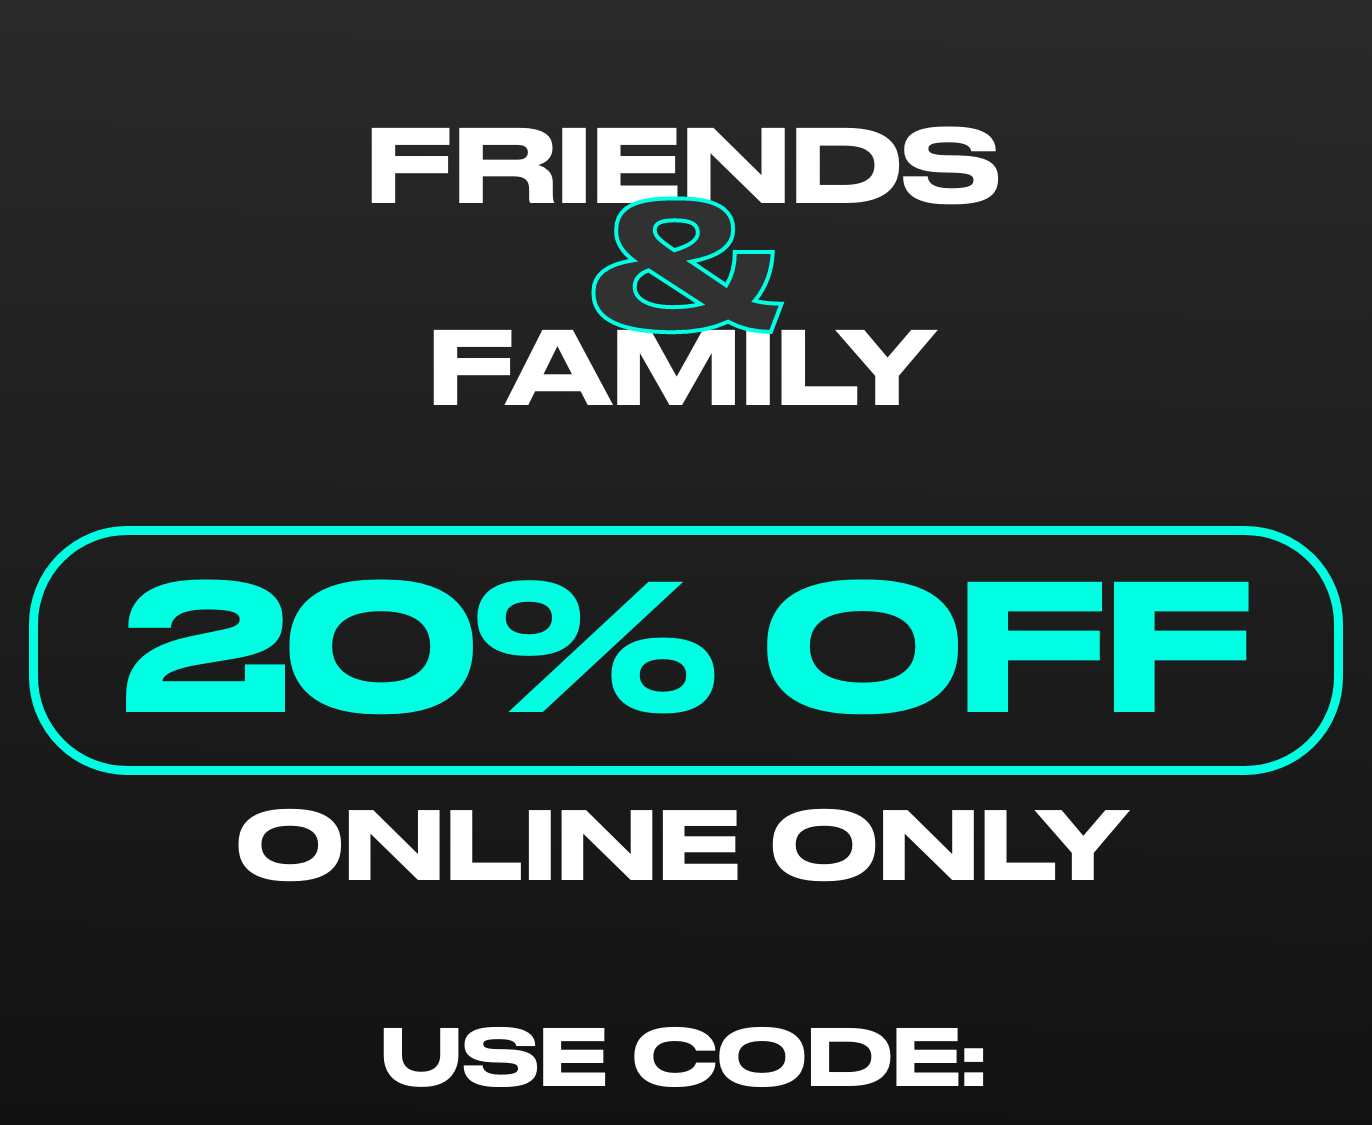 Friends and Family promotion